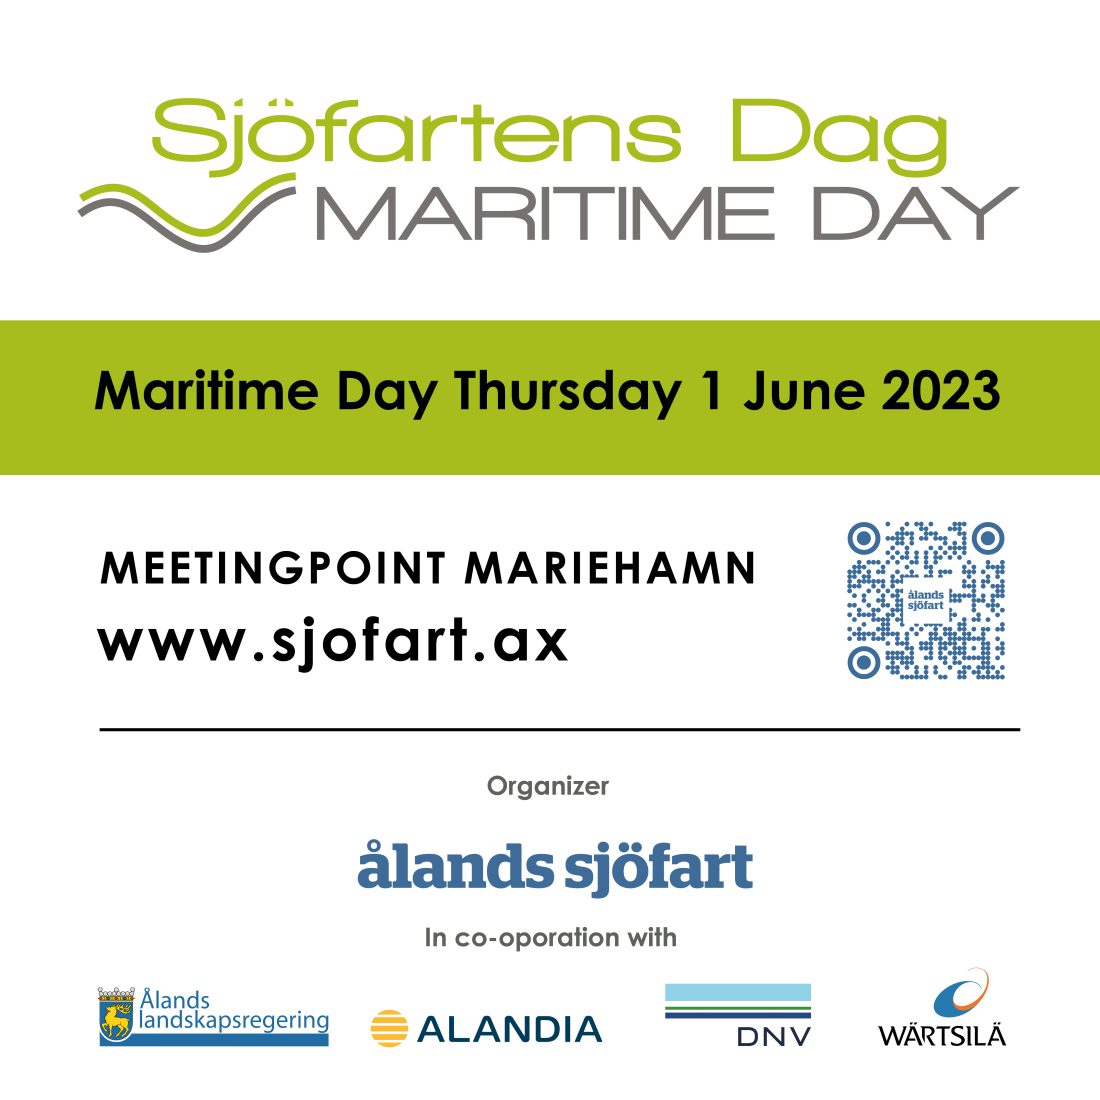 Image with information about Maritime Day 2023